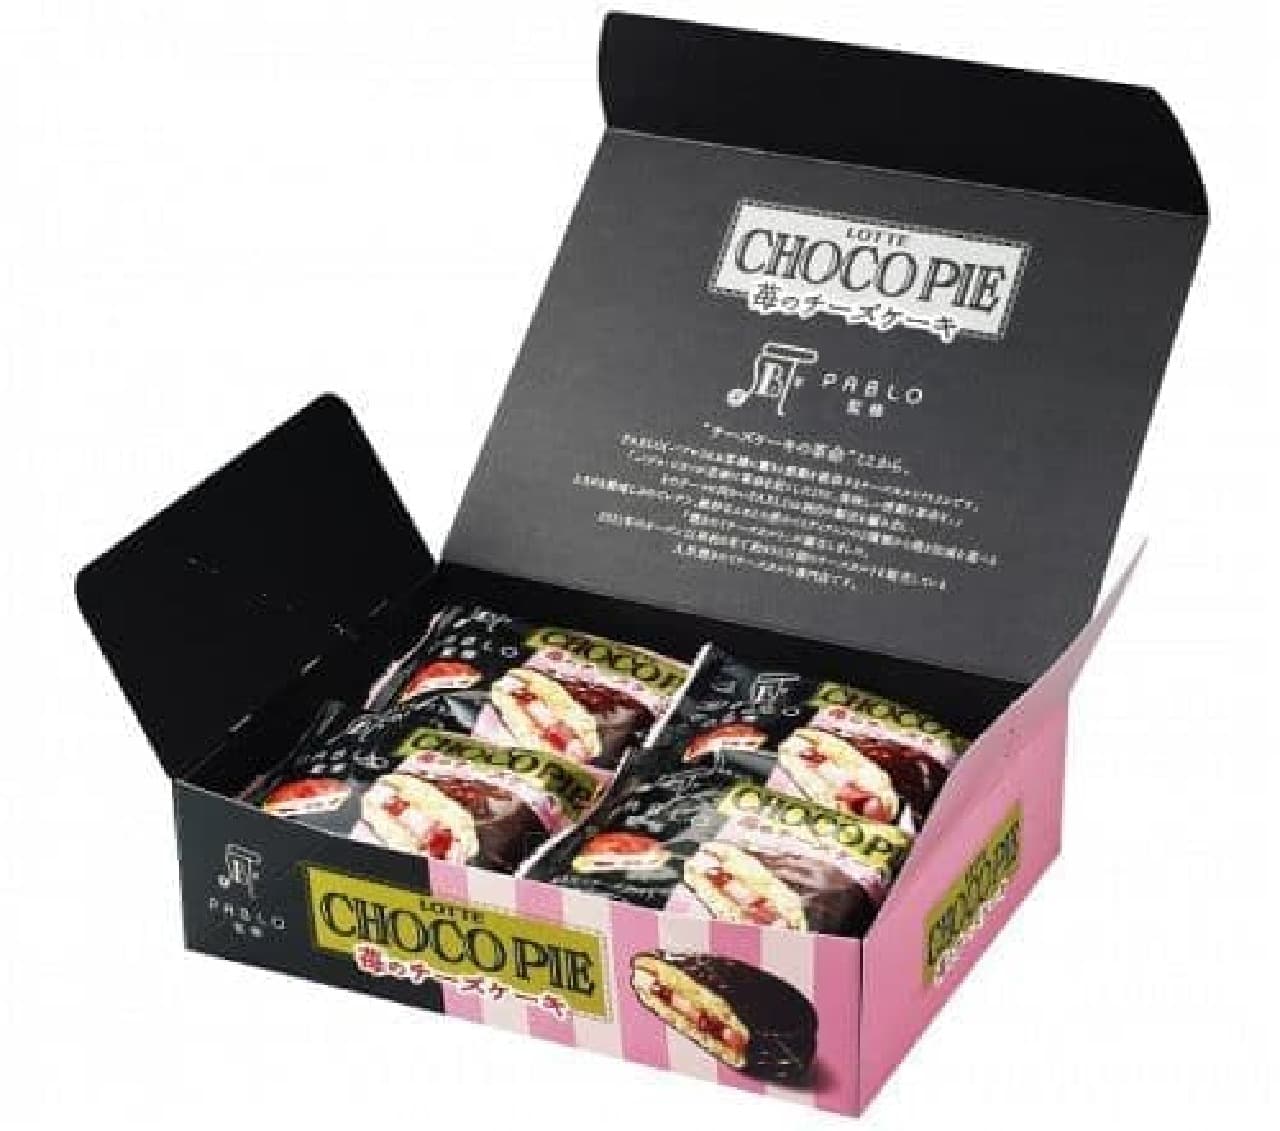 Lotte "Choco Pie [Strawberry Cheesecake Supervised by PABLO]"